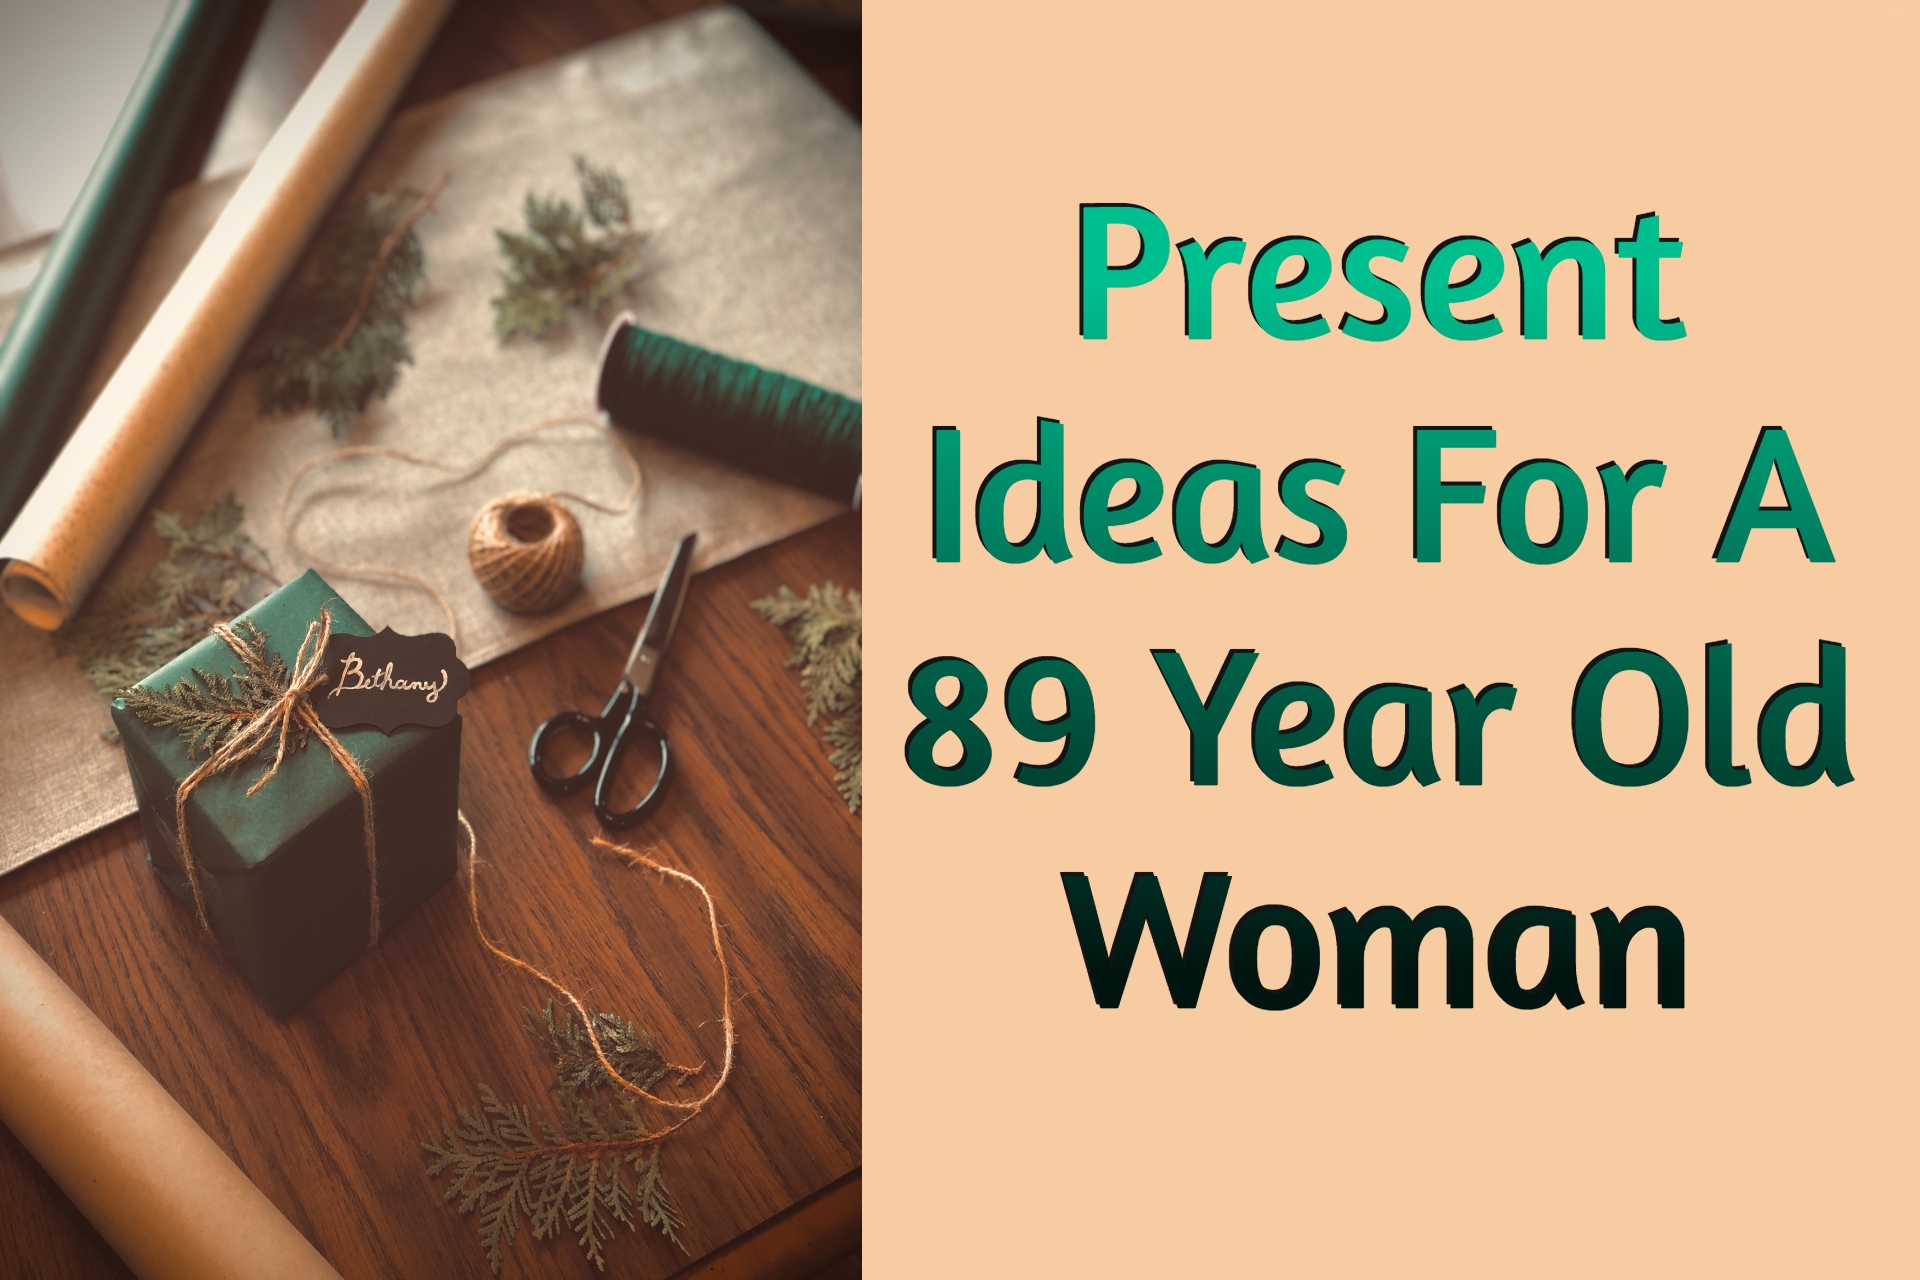 Cover image of gift ideas for 89-year-old woman by Giftsedge